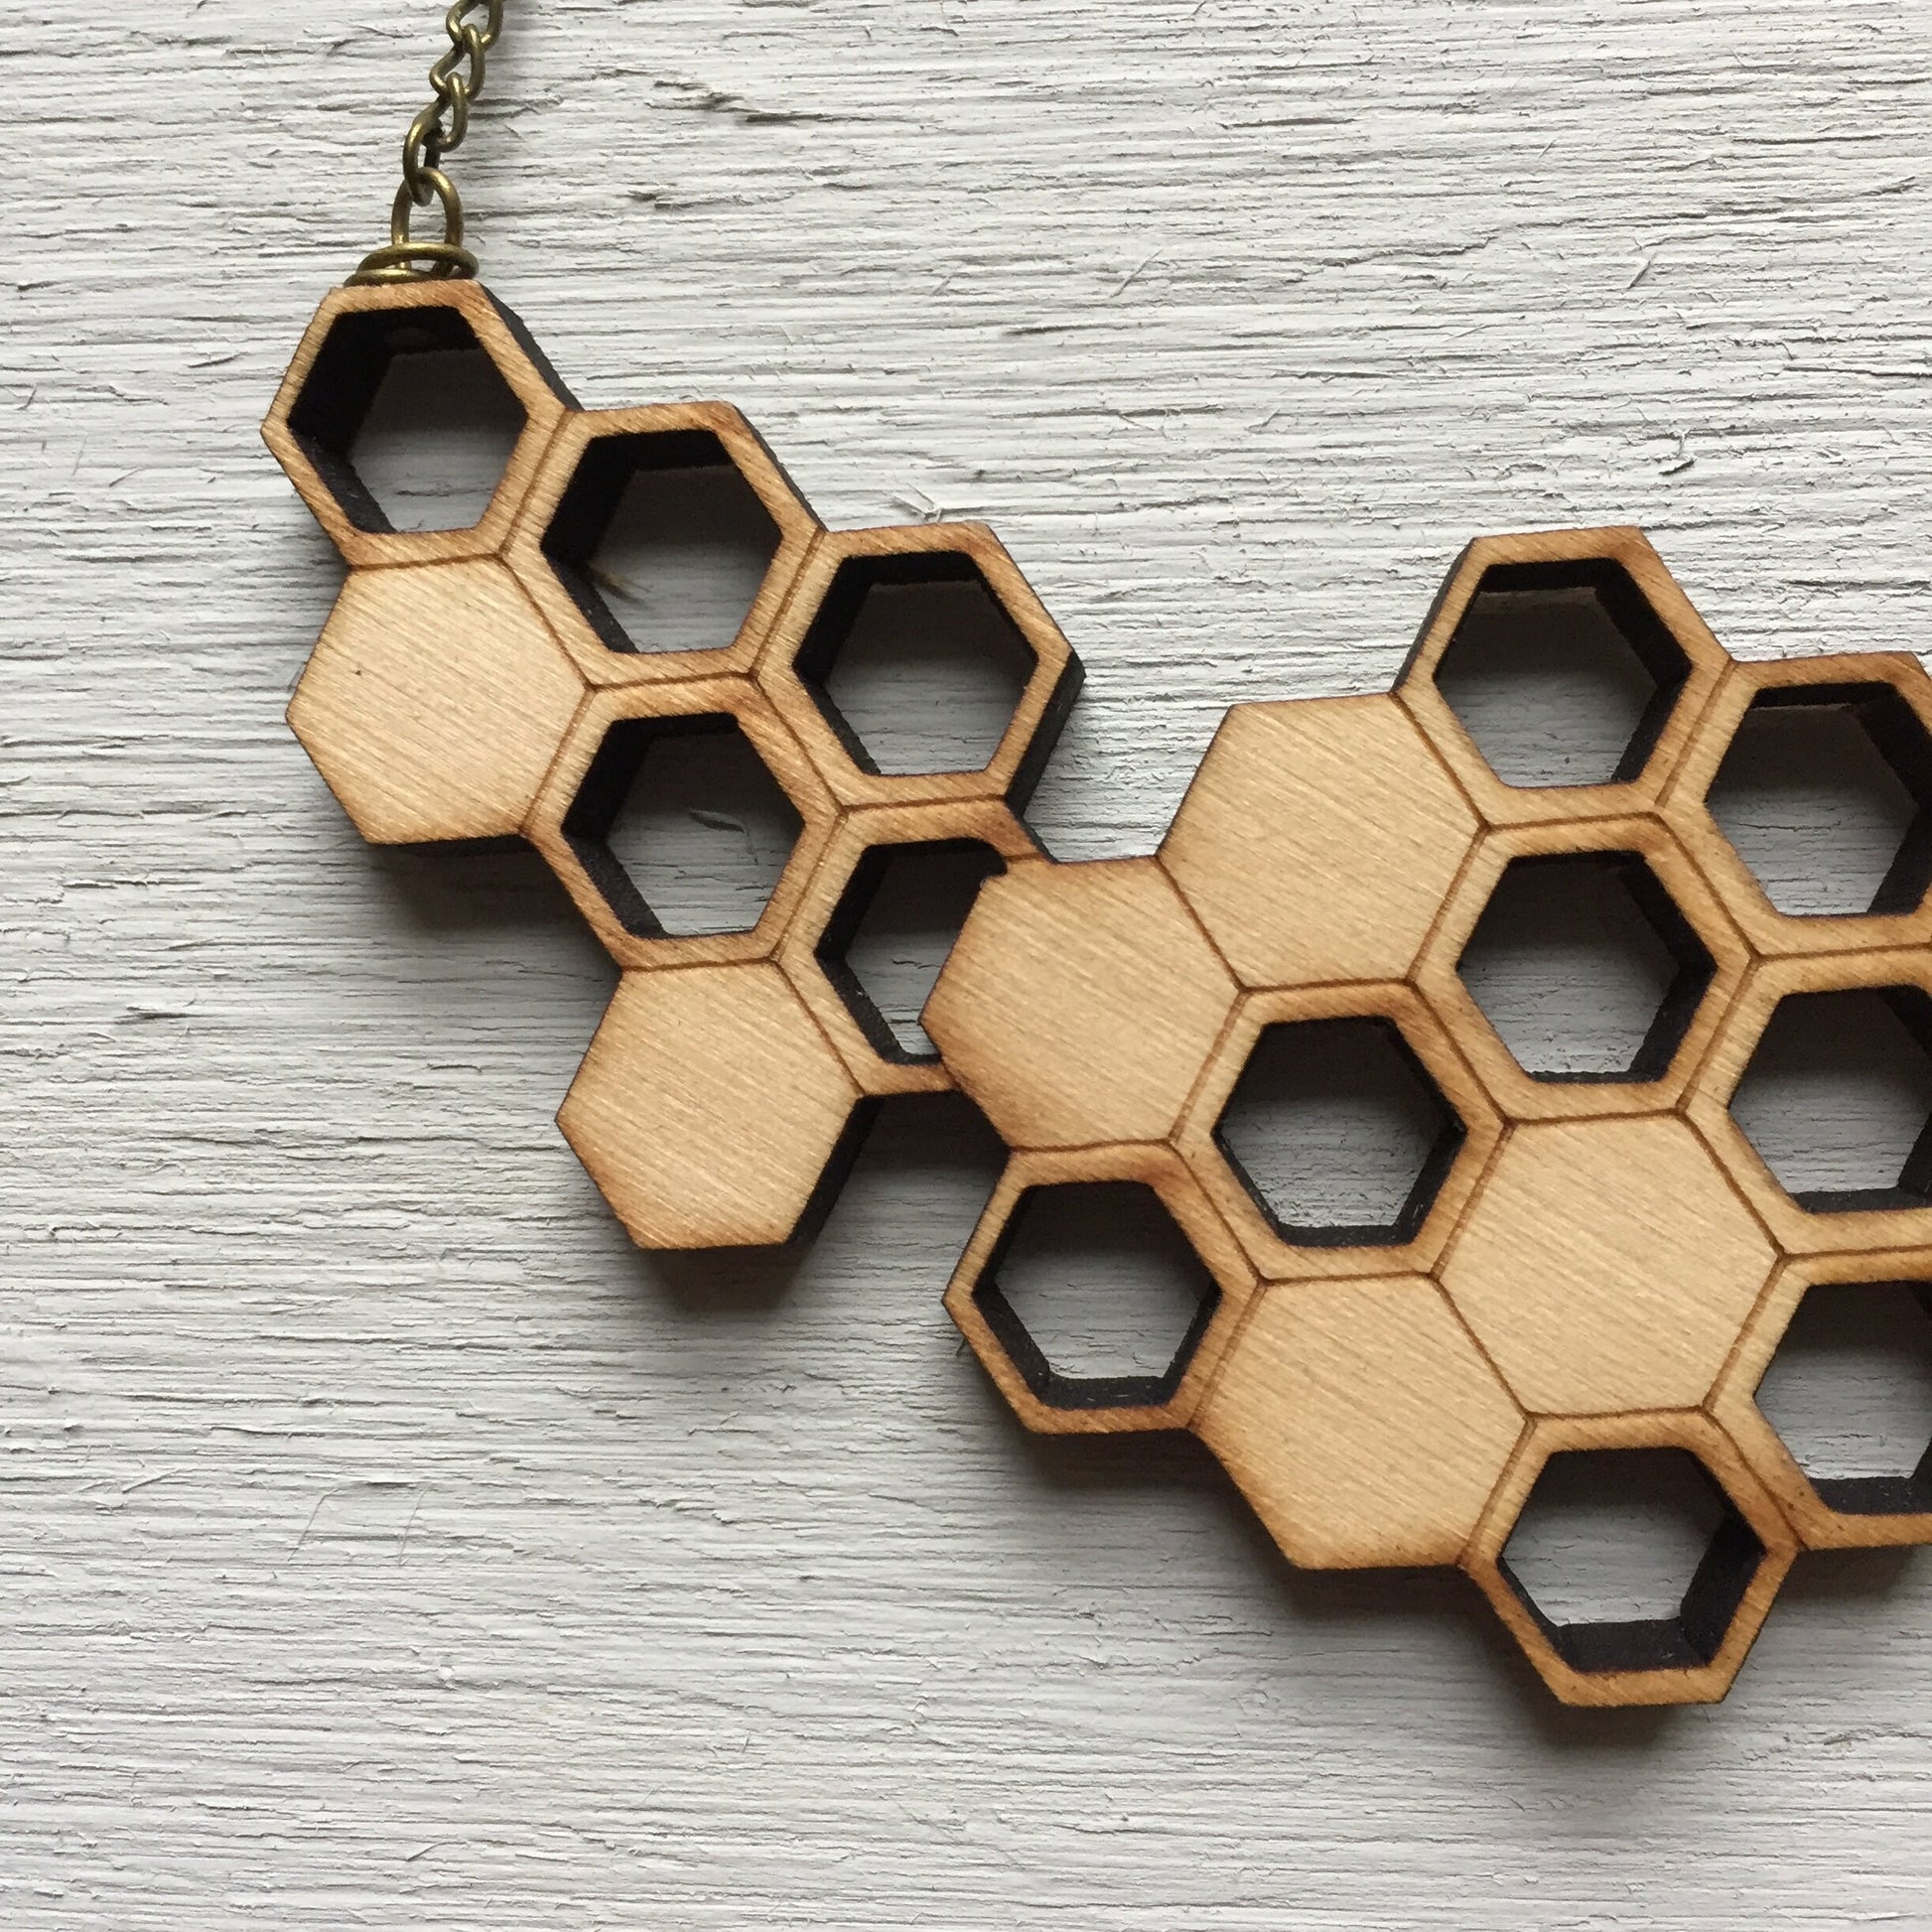 Honeycomb Statement Necklace- Wooden Laser Cut Necklace || Modern Geometric Jewelry